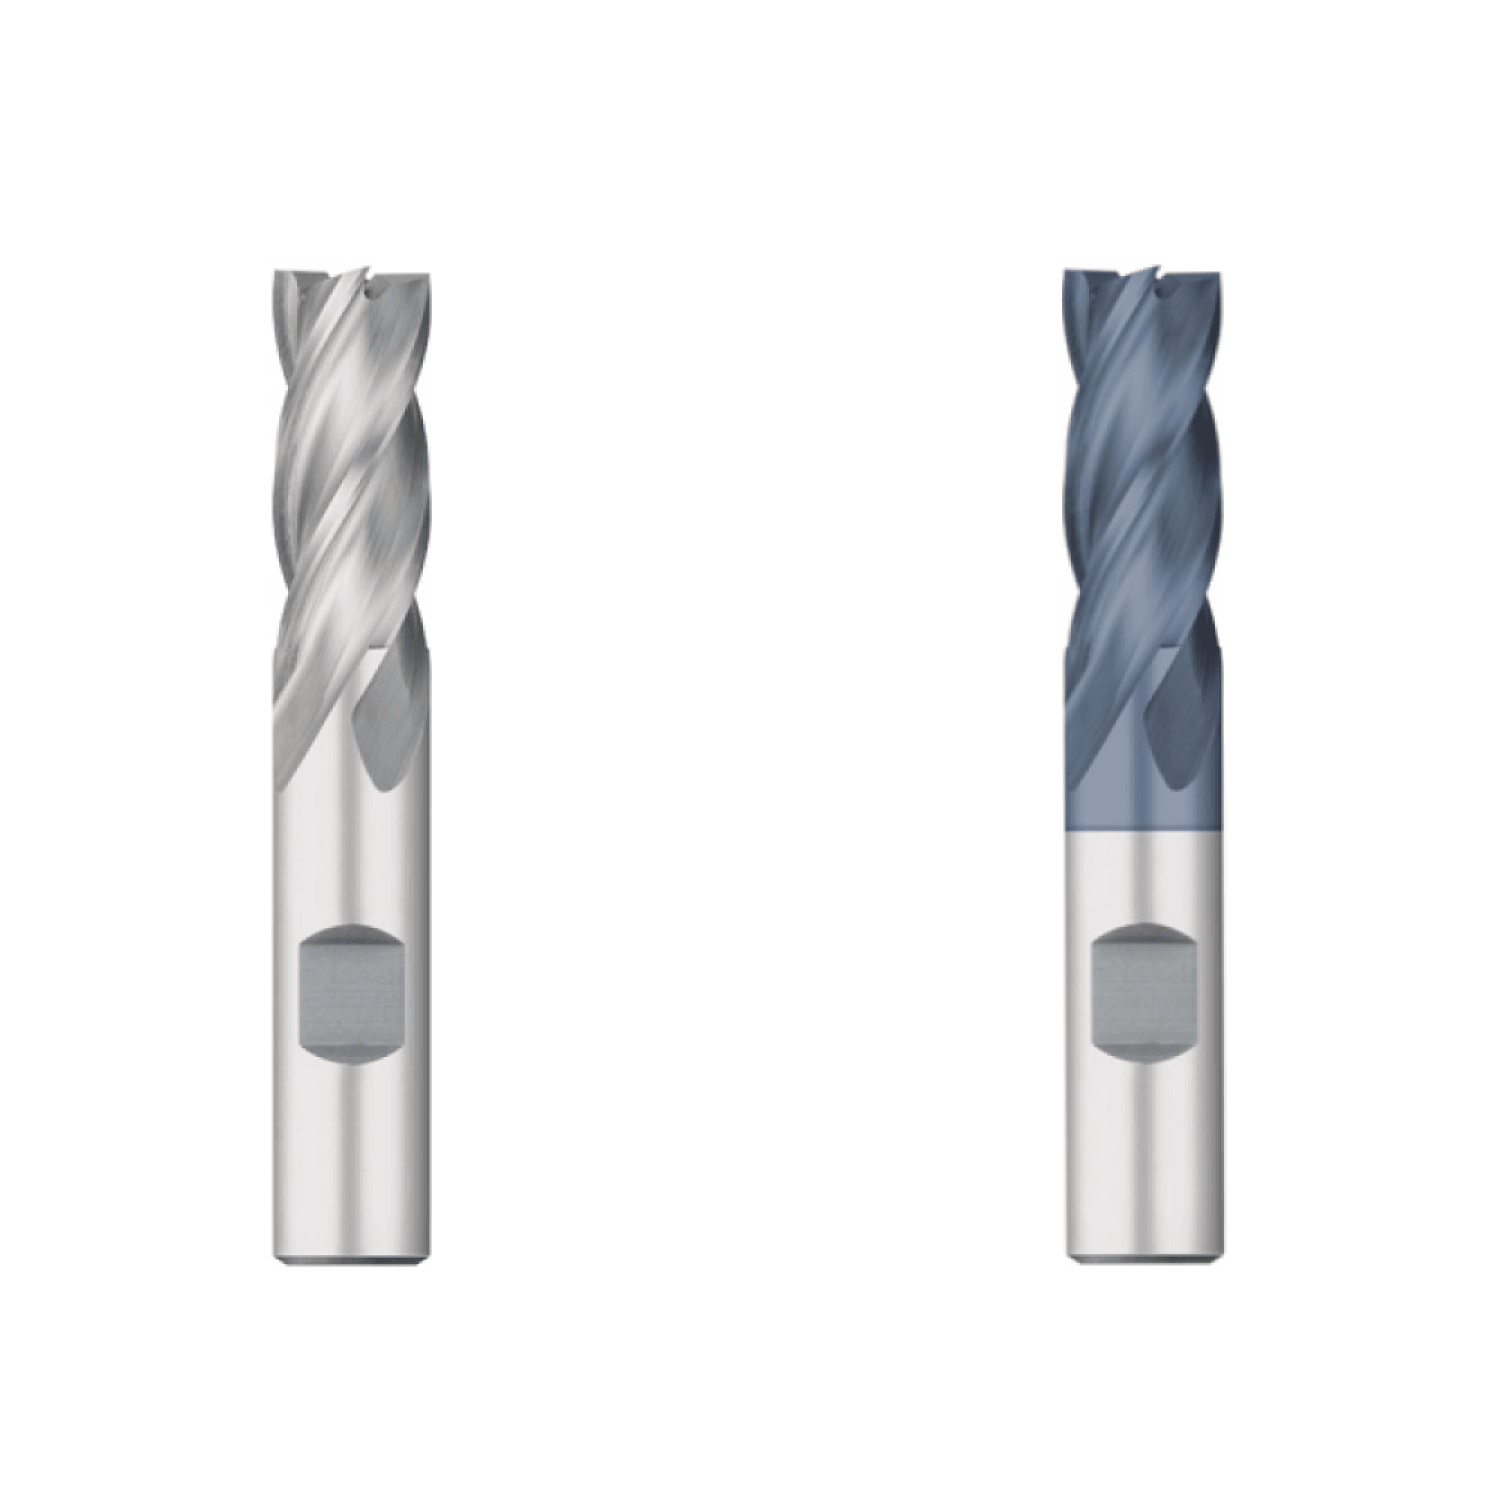 1-3/4" x 2" LOC (2 Pack) HSS 6 Flute End Mills (1-1/4" Shanks) - The End Mill Store 